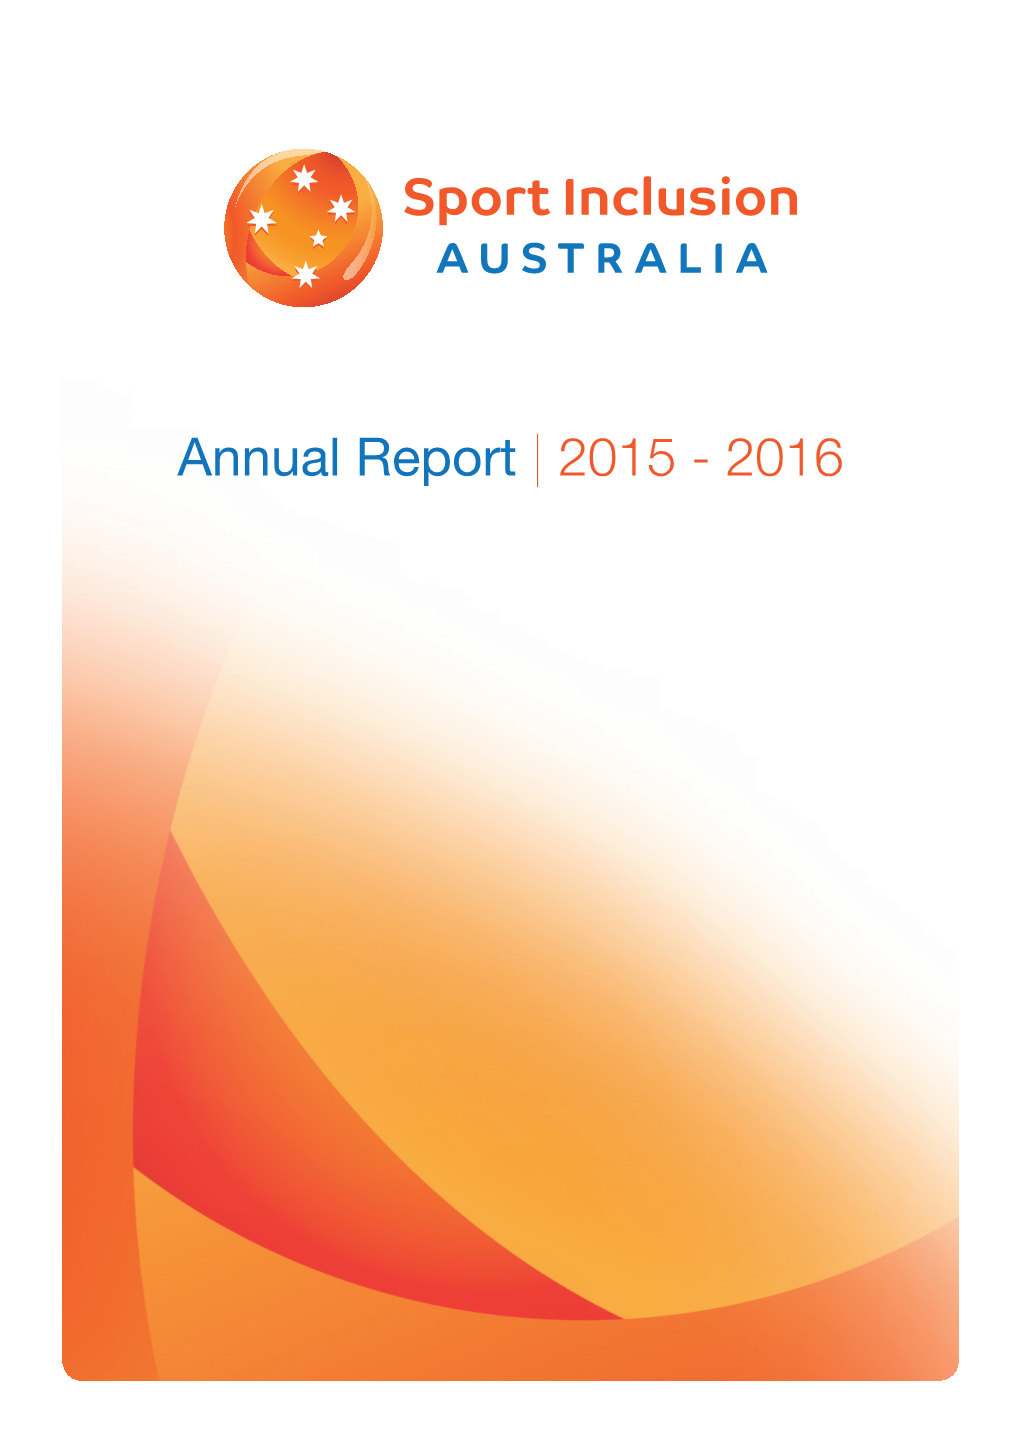 Annual Report | 2015 - 2016 Contents